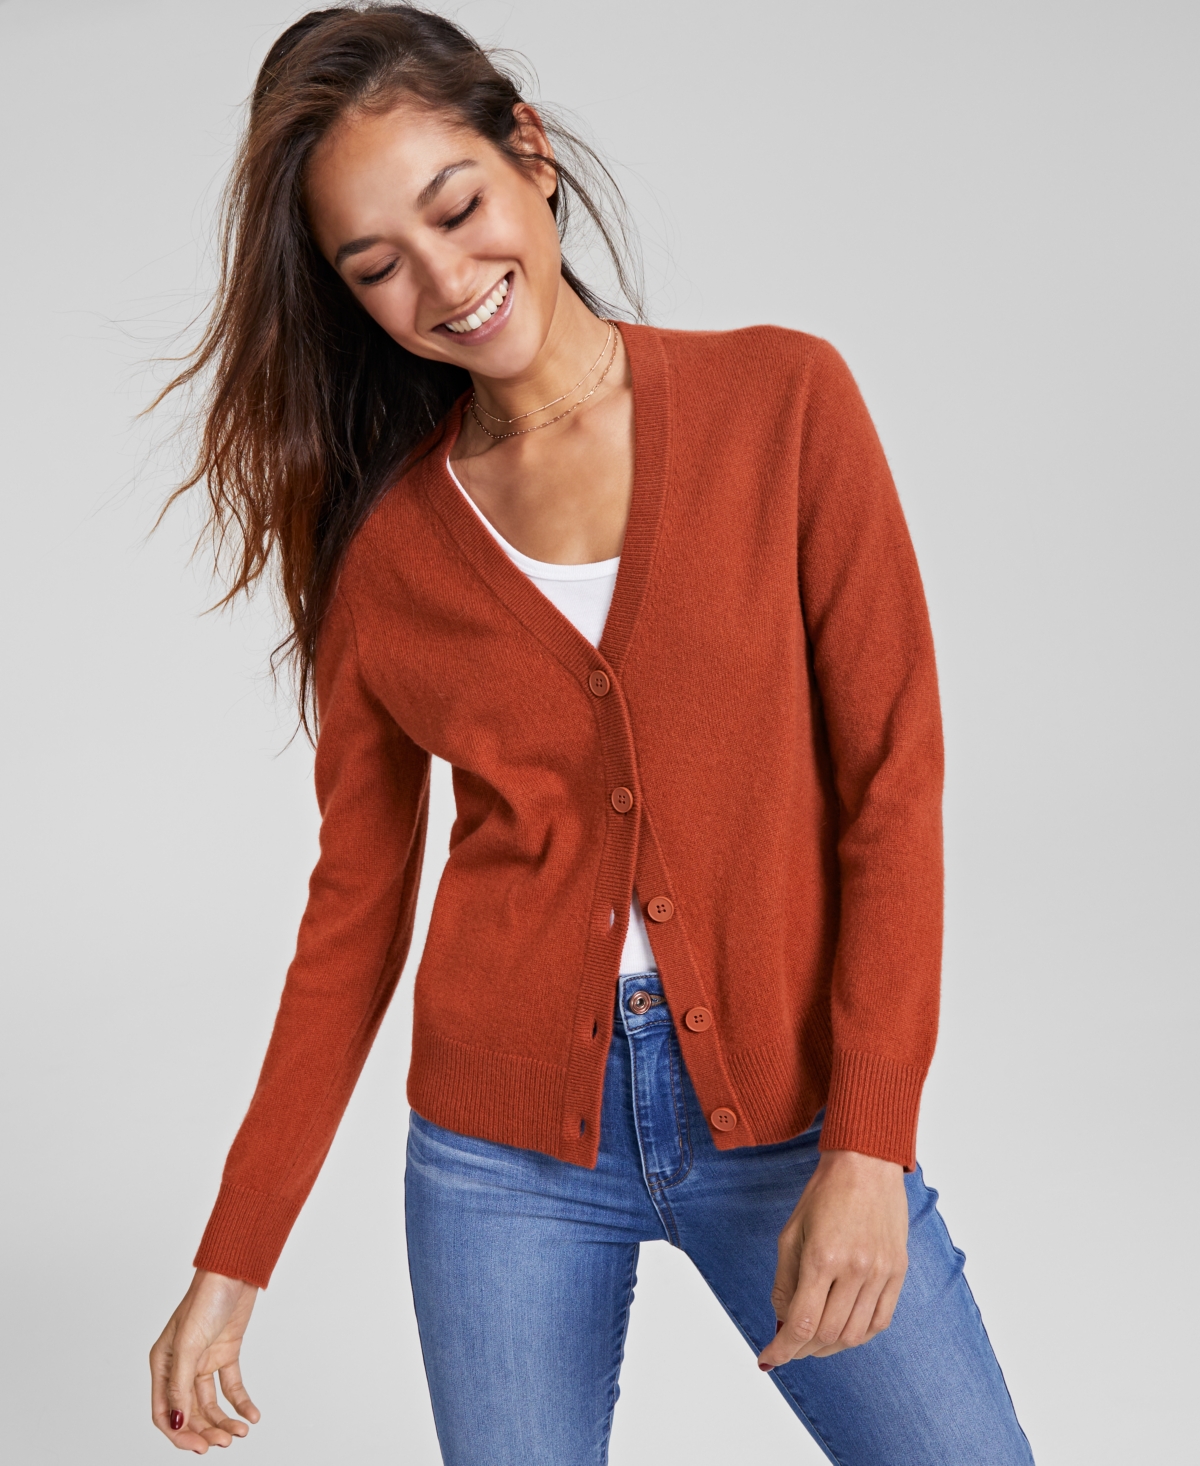 CHARTER CLUB WOMEN'S 100% CASHMERE CARDIGAN, CREATED FOR MACY'S